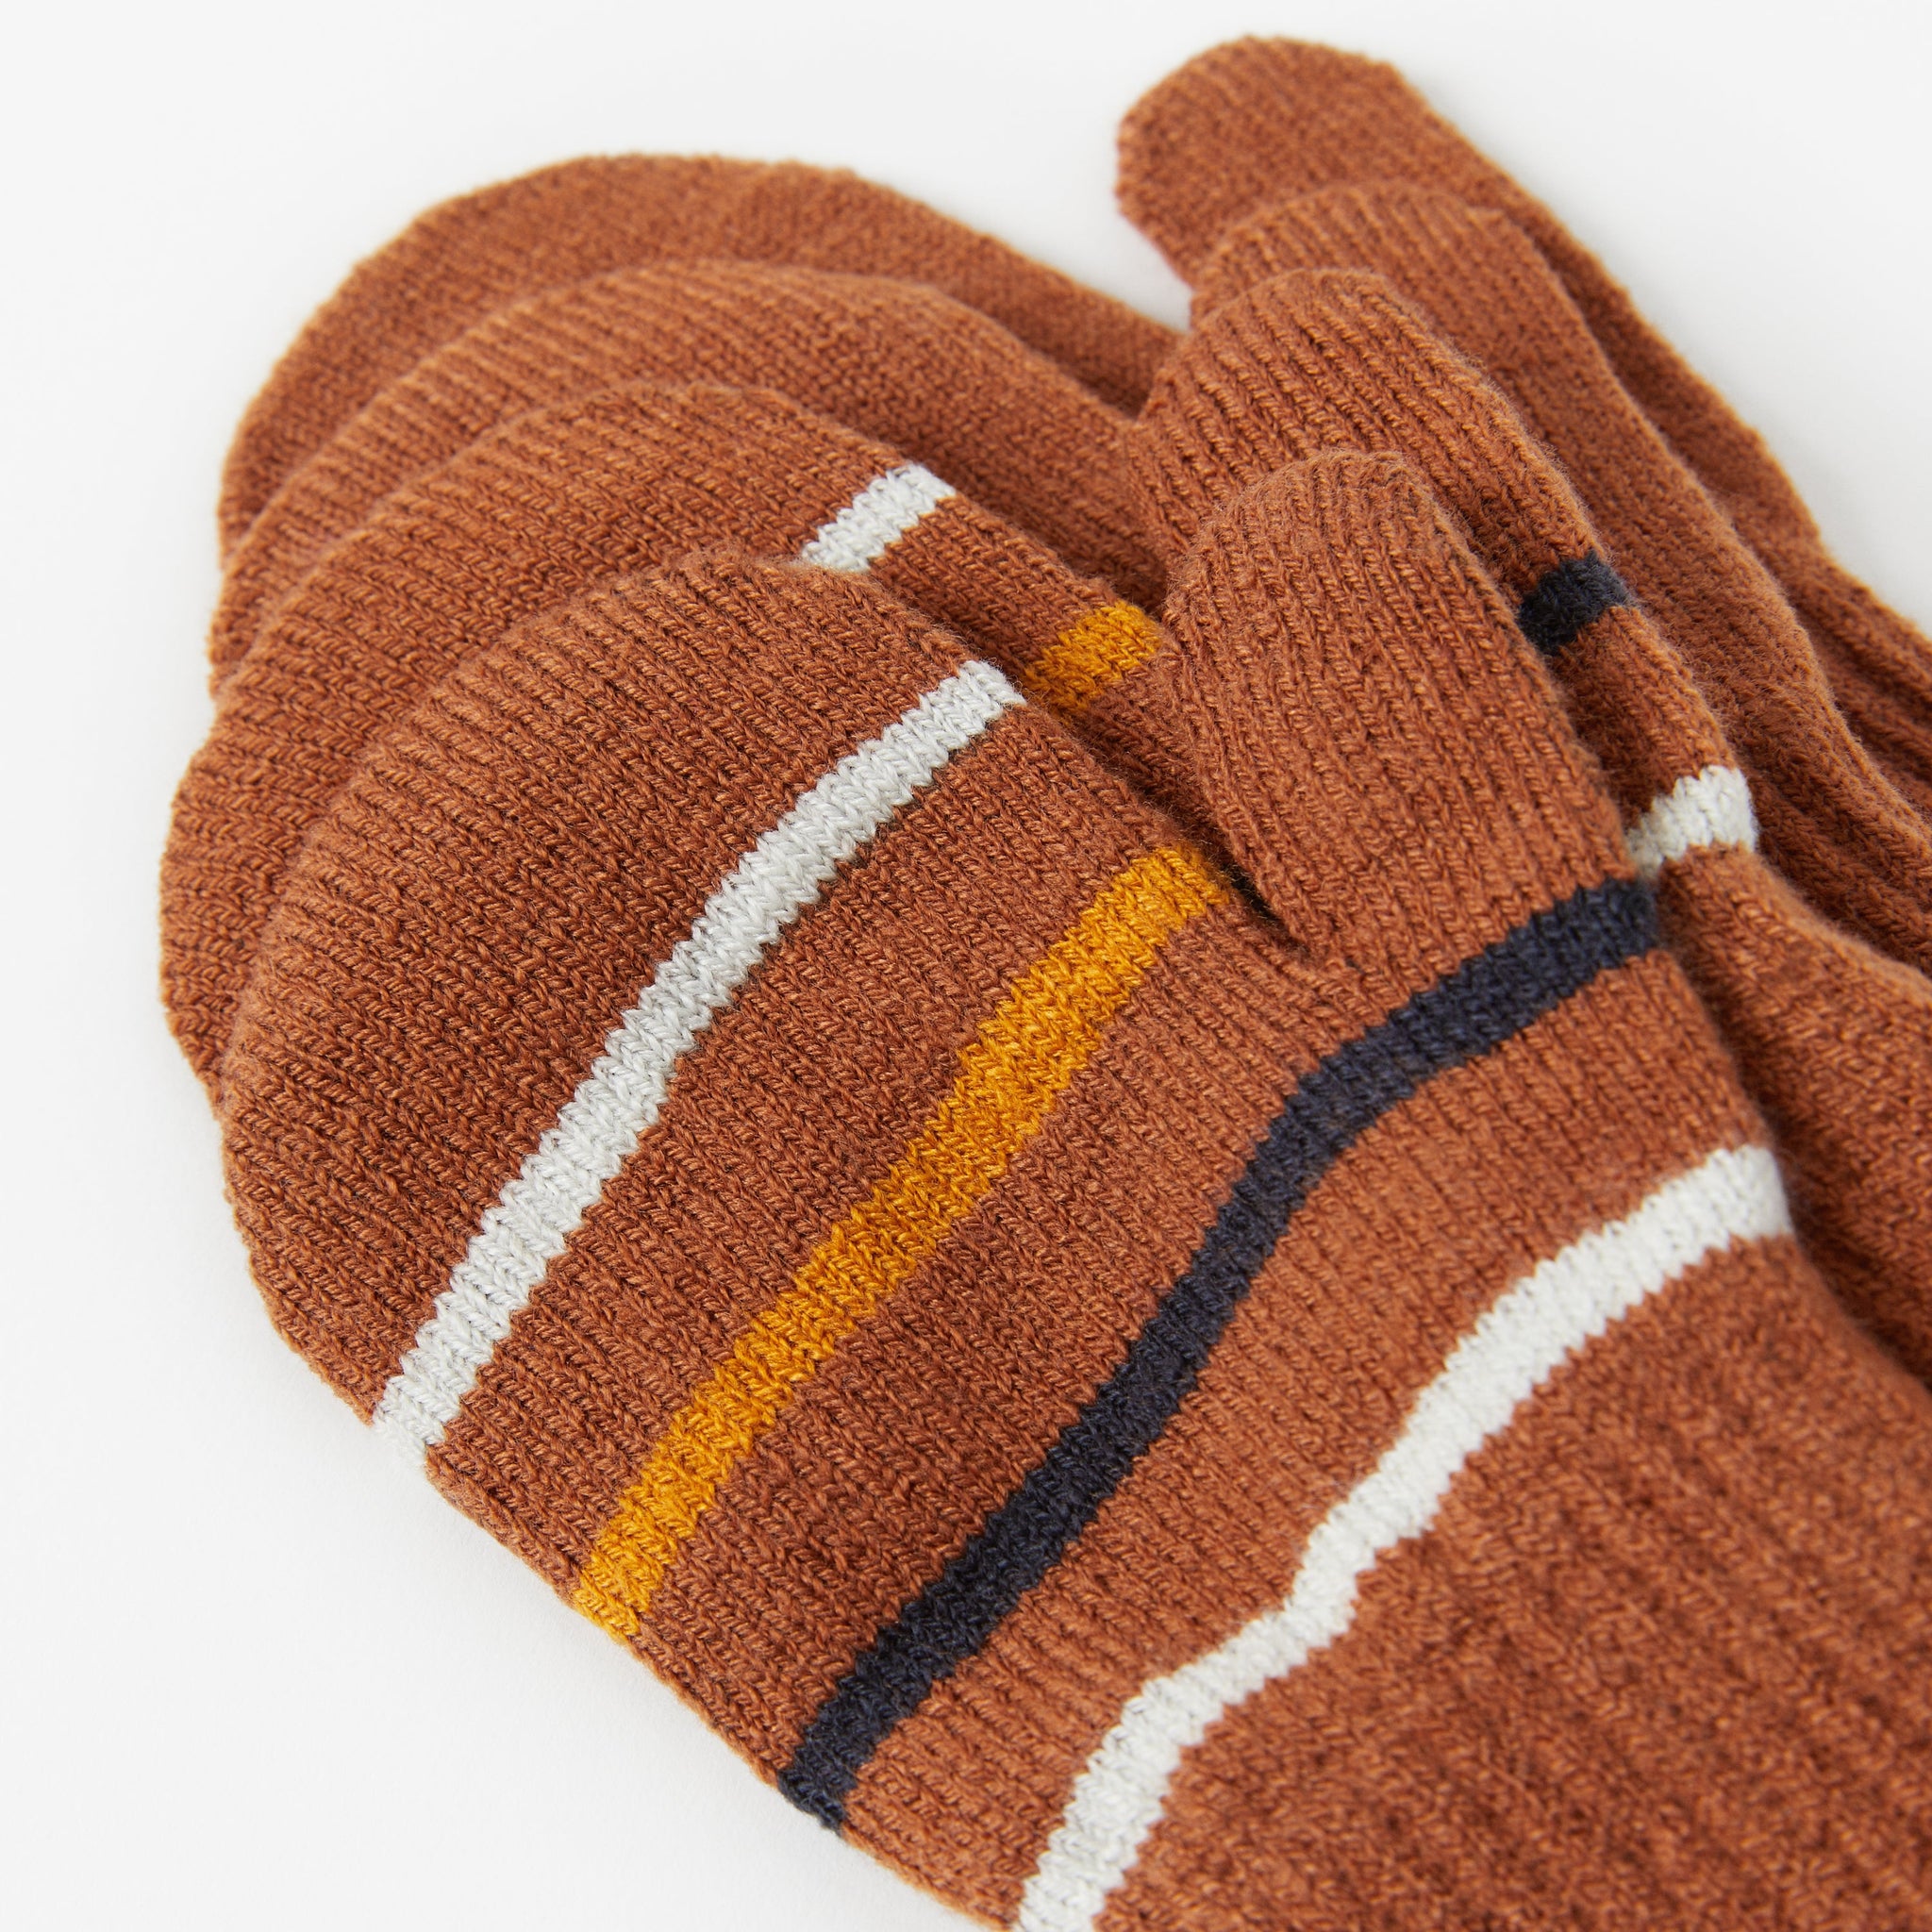 Orange Magic Kids Mittens Multipack from the Polarn O. Pyret kidswear collection. Quality kids clothing made to last.